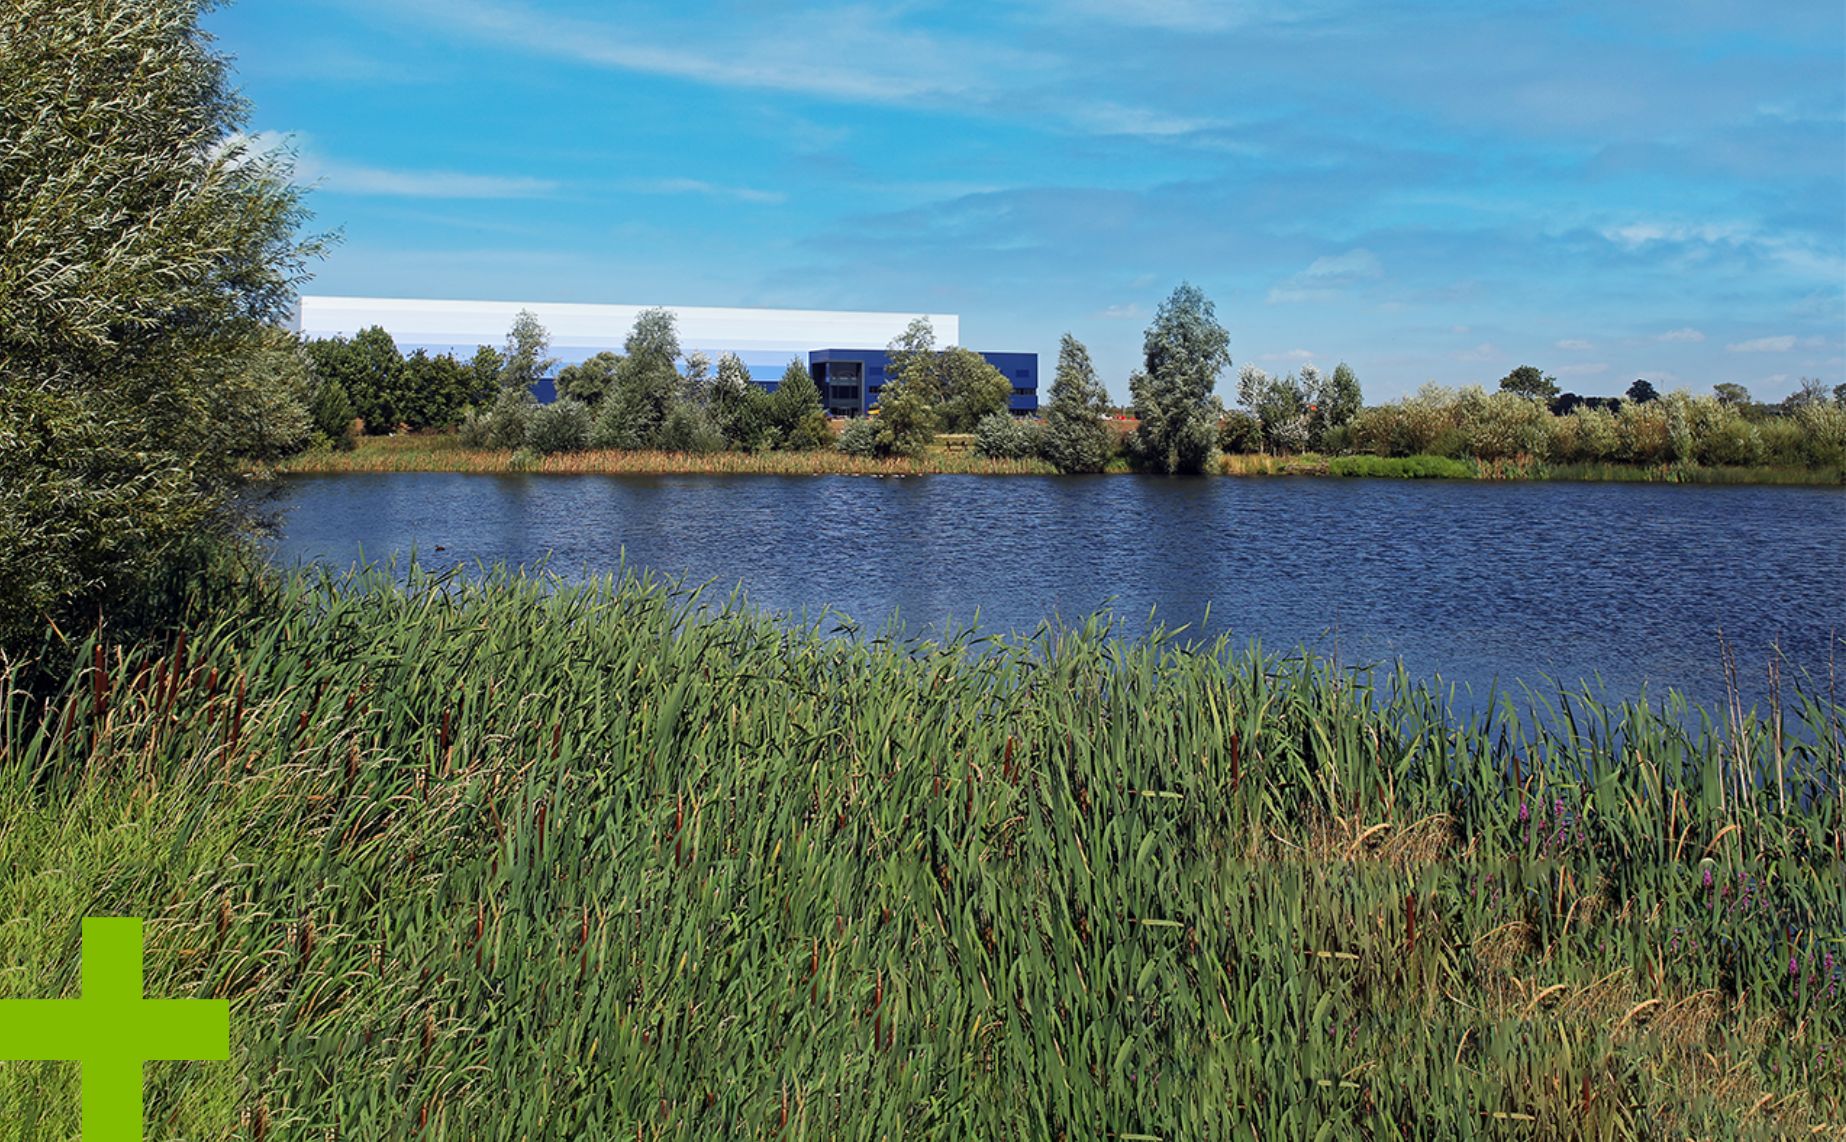 GLP logistics building seen across a river with grass and trees in the foreground.